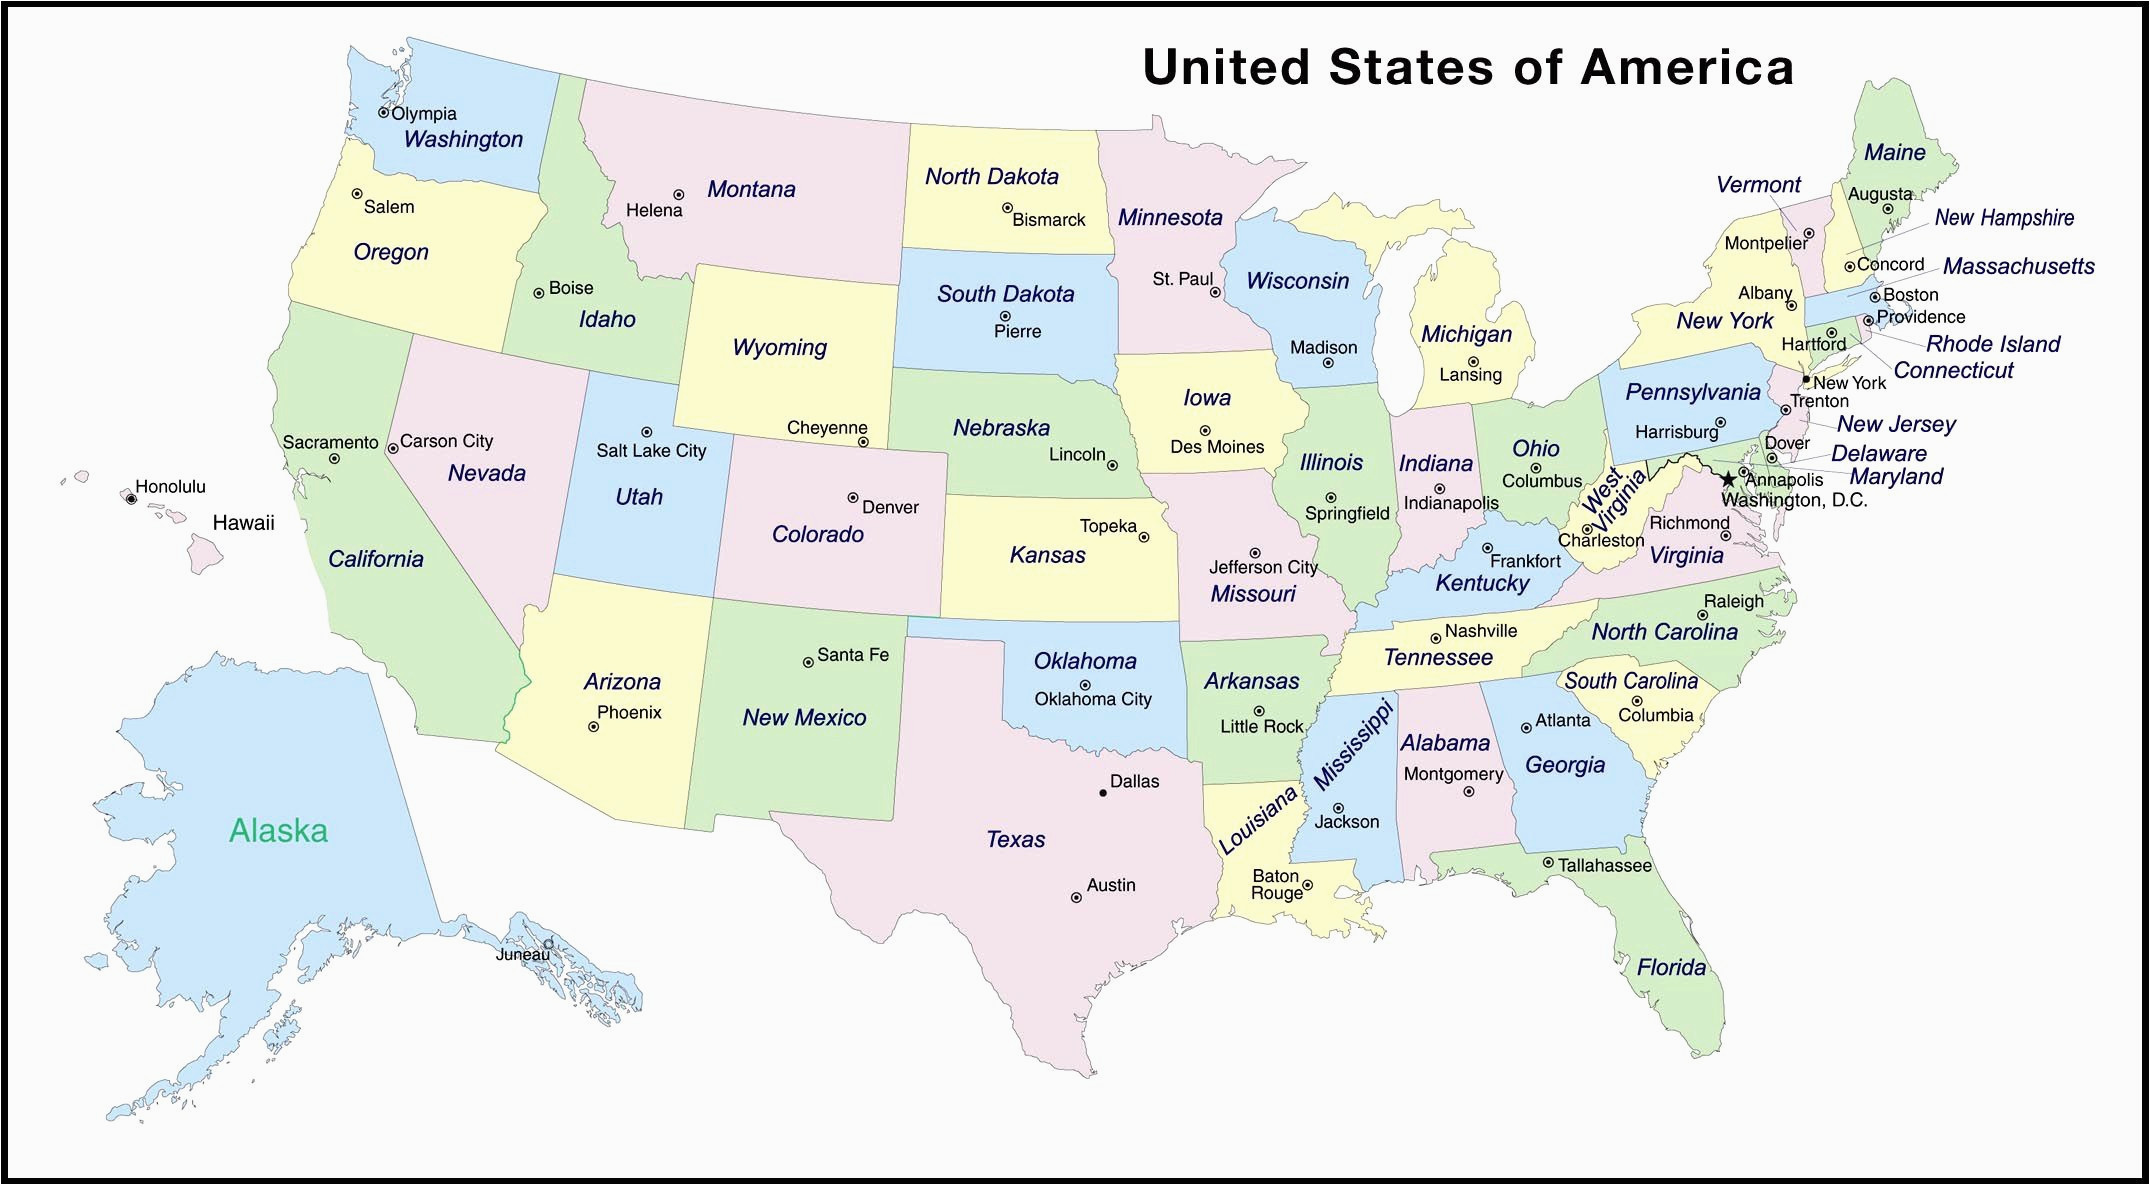 Area Code Map Of California United States area Codes Map New Map Od Us with Cities Wmasteros